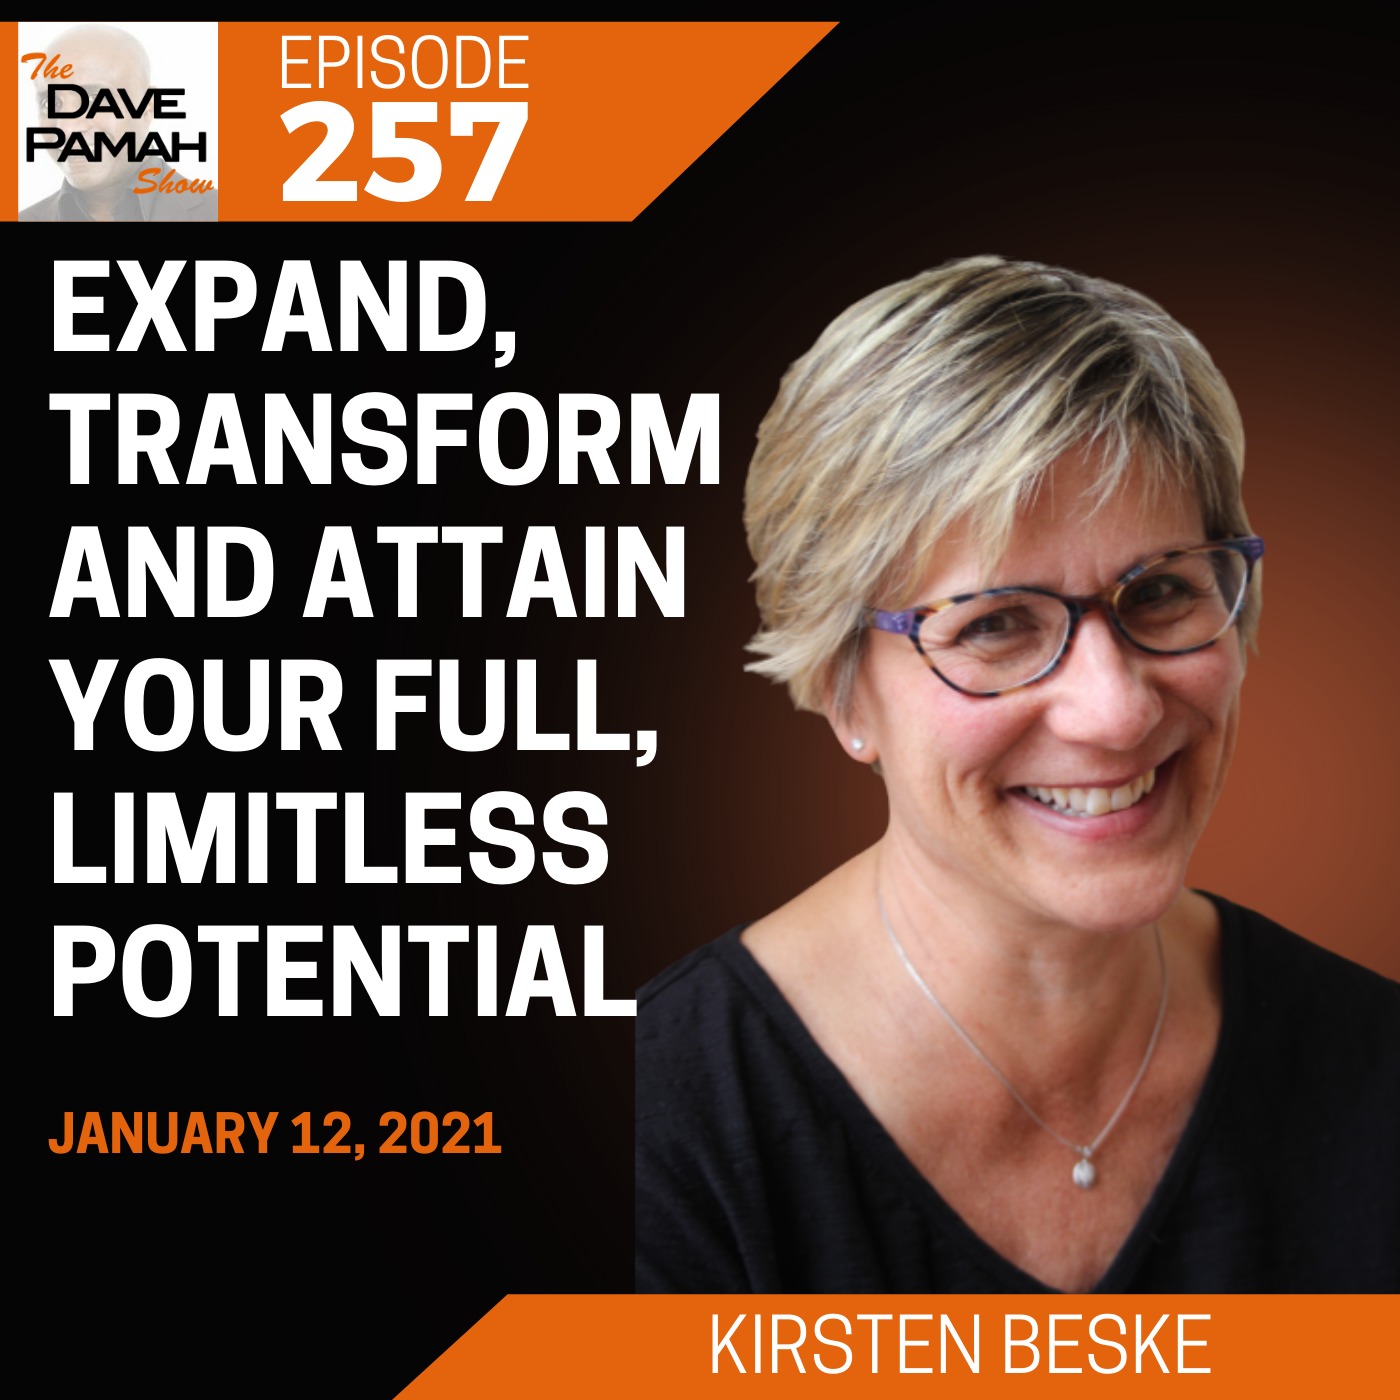 Expand, transform and attain your full, limitless potential with Kirsten Beske